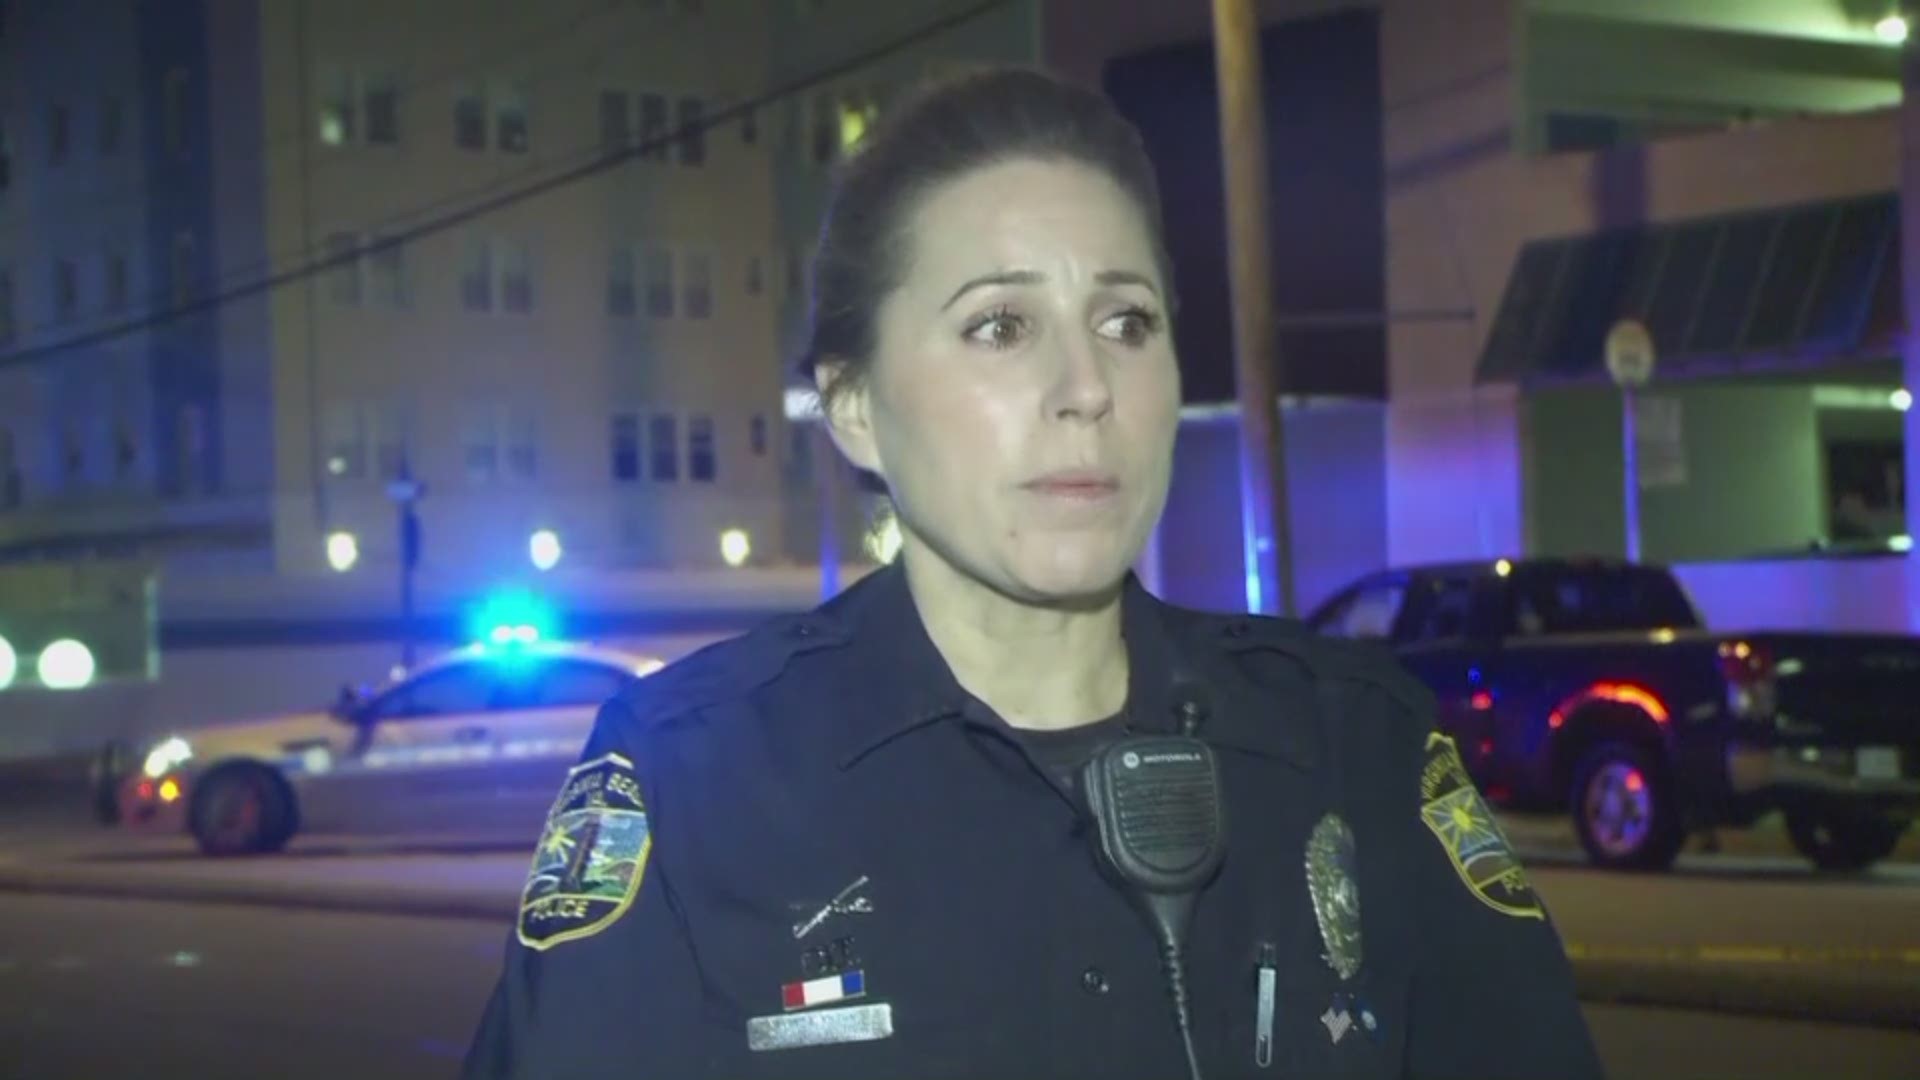 Virginia Beach Master Police Officer Linda Kuehn gives an update on a shooting by an officer that left an armed suspect dead at the Oceanfront.